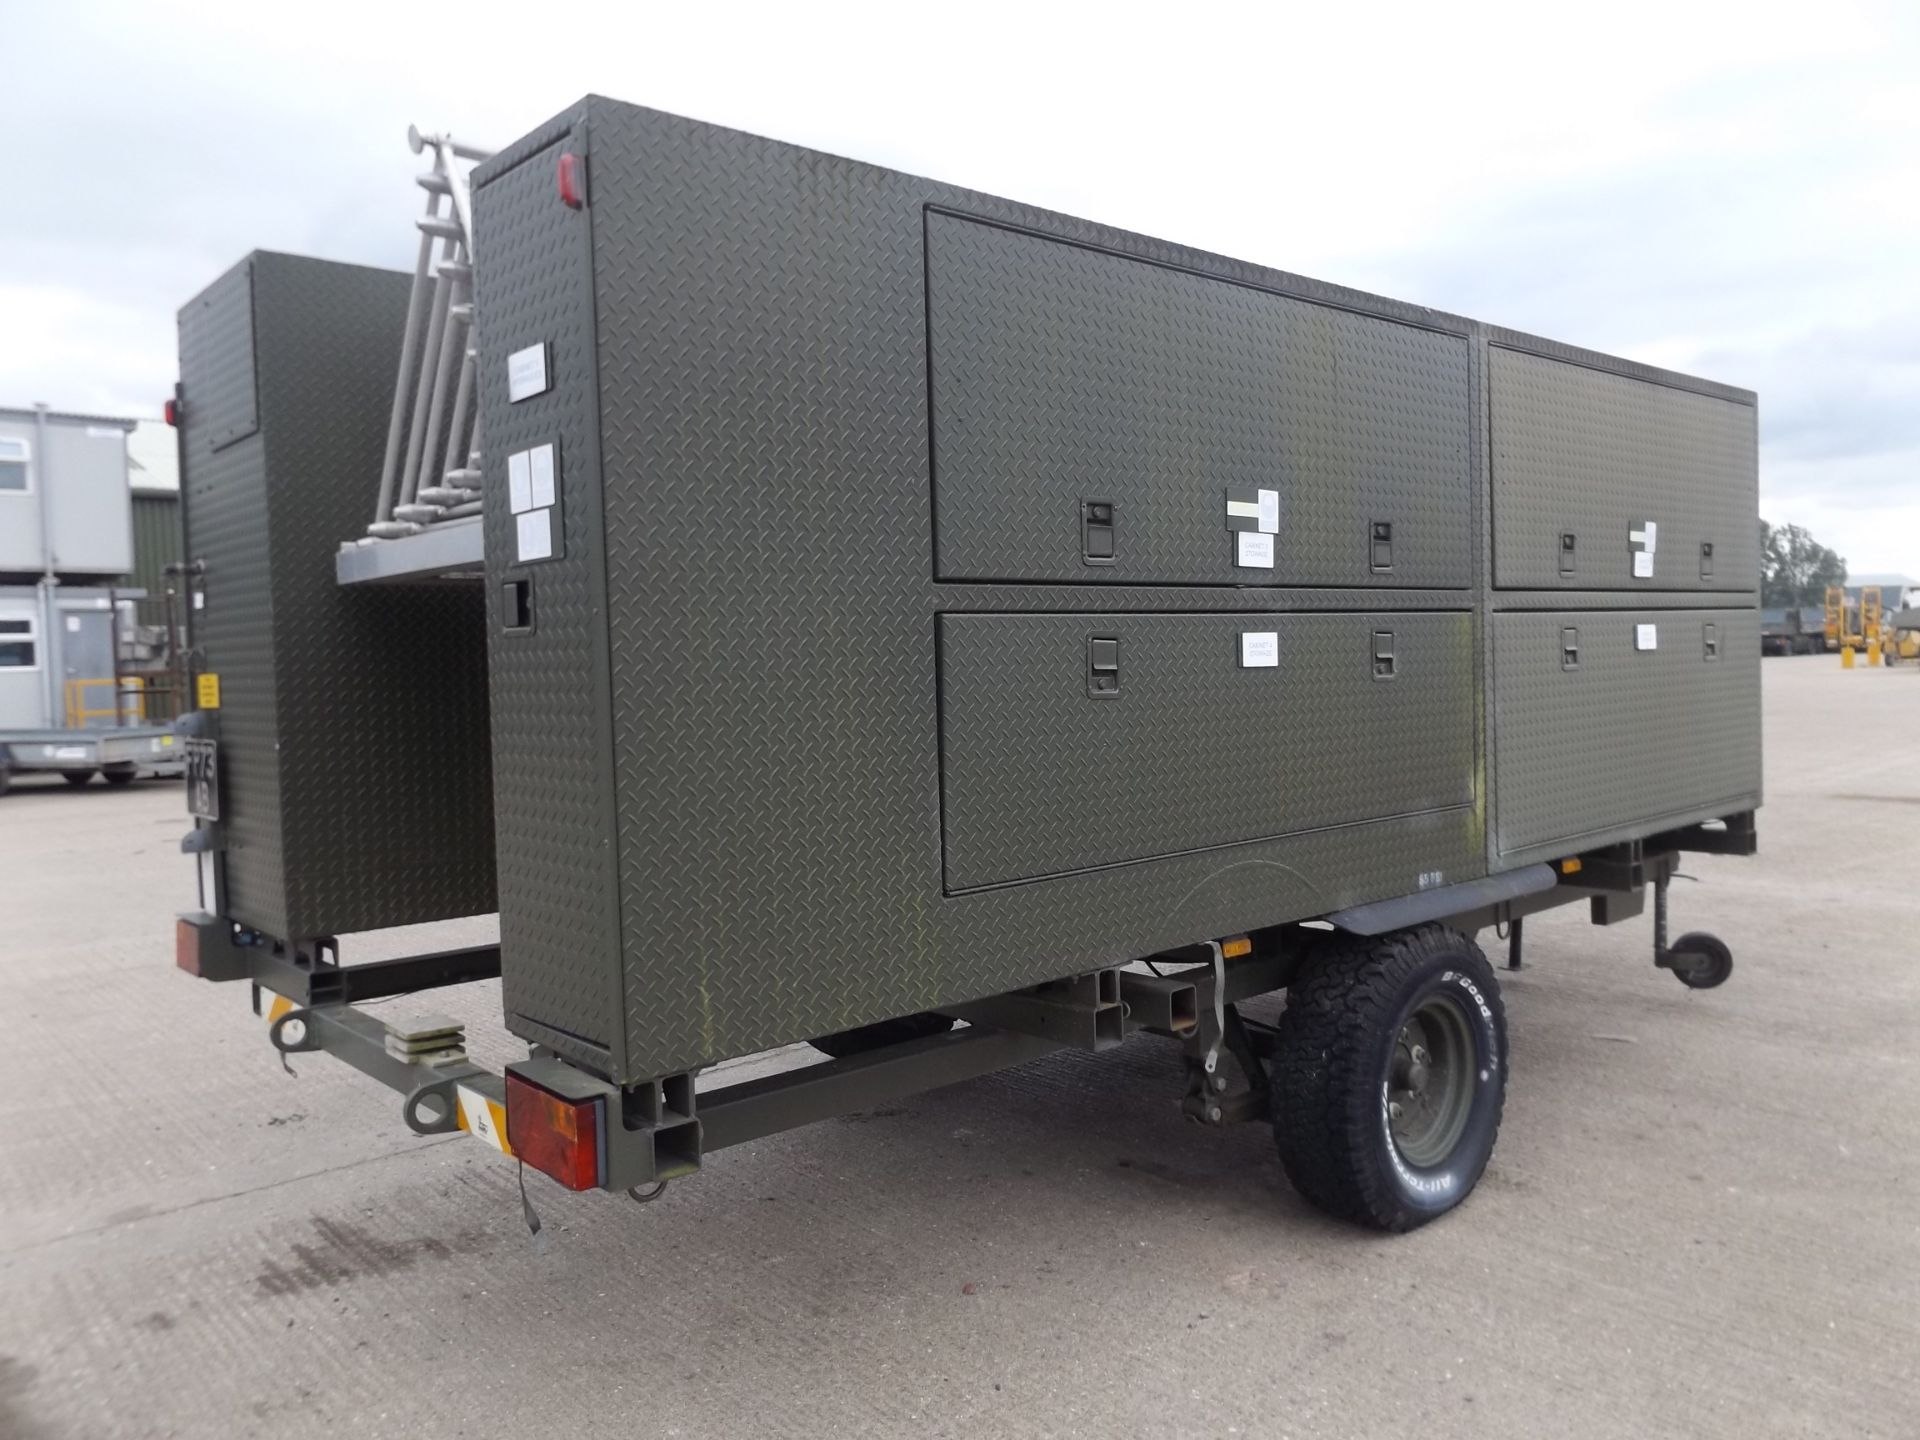 Deployable TUP-3 MW AM Broadcast Mobile Antenna System. - Image 4 of 24